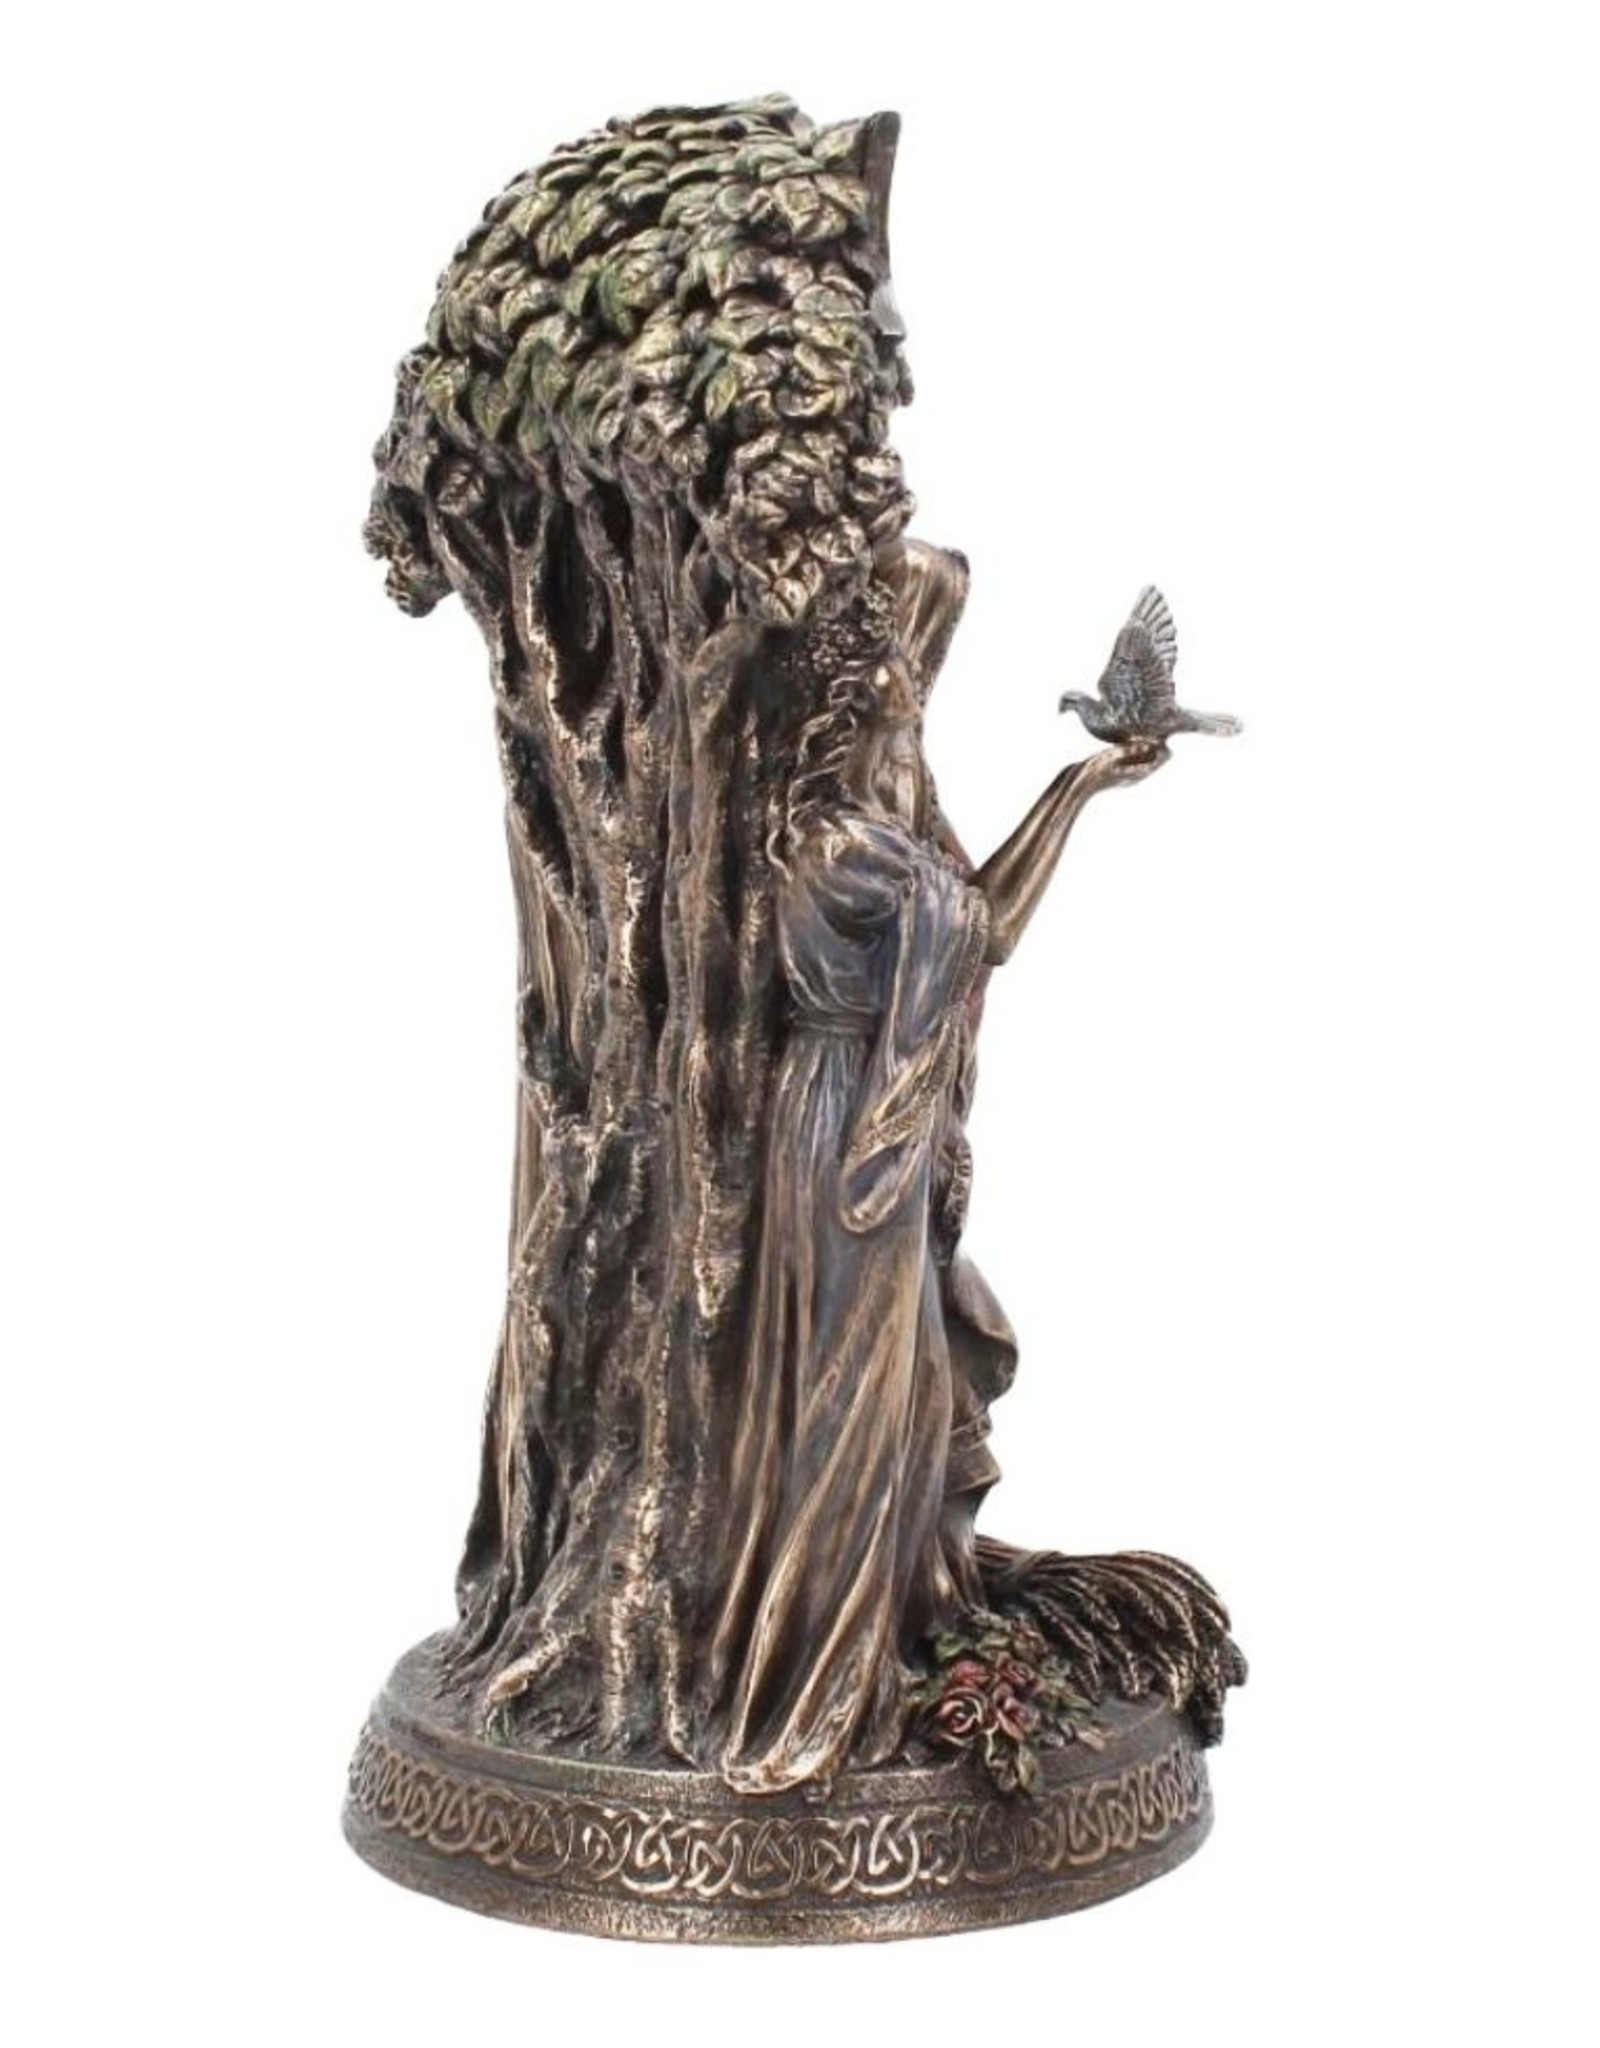 Willow Hall Giftware & Lifestyle -  Maiden, Mother, Crone Triple Moon Bronzed Figurine